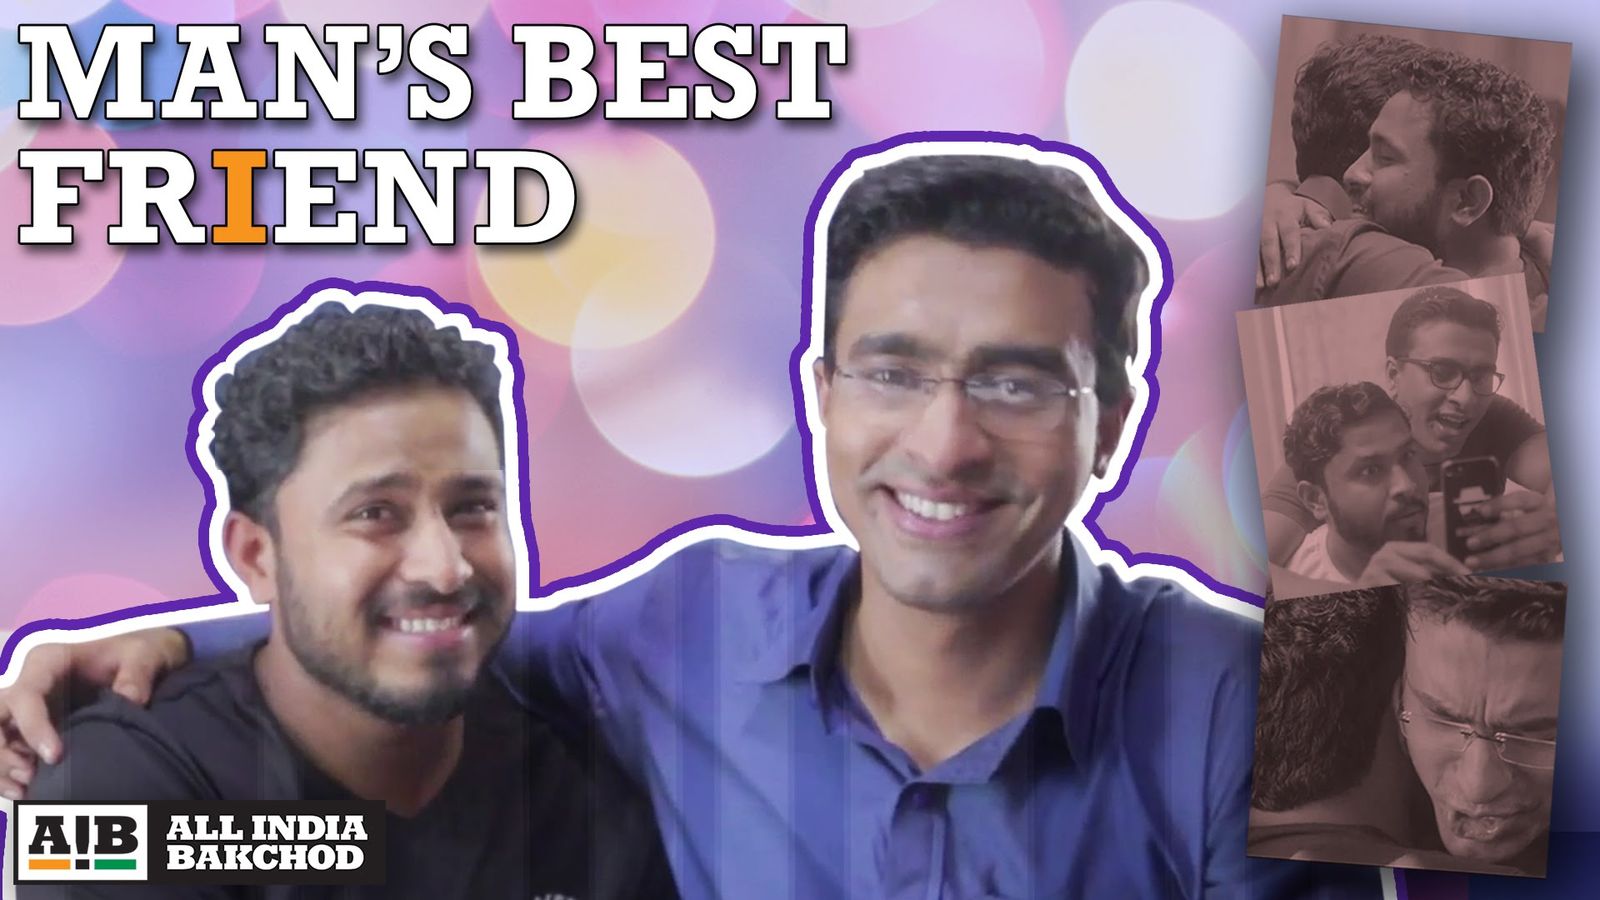 Who Do You Think Is a Man's Best Friend? AIB Answers!